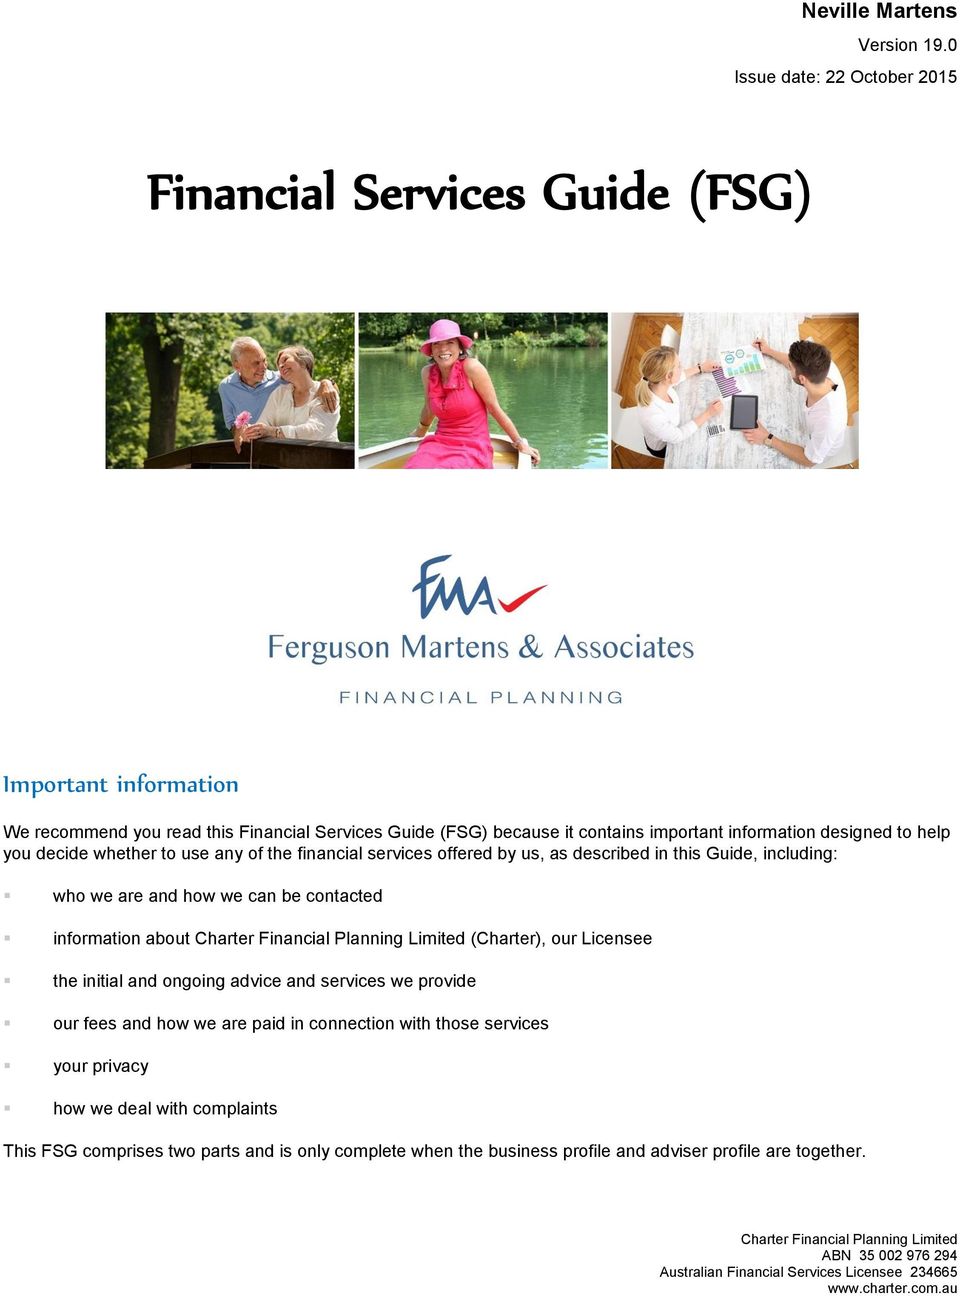 you decide whether to use any of the financial services offered by us, as described in this Guide, including: who we are and how we can be contacted information about Charter Financial Planning